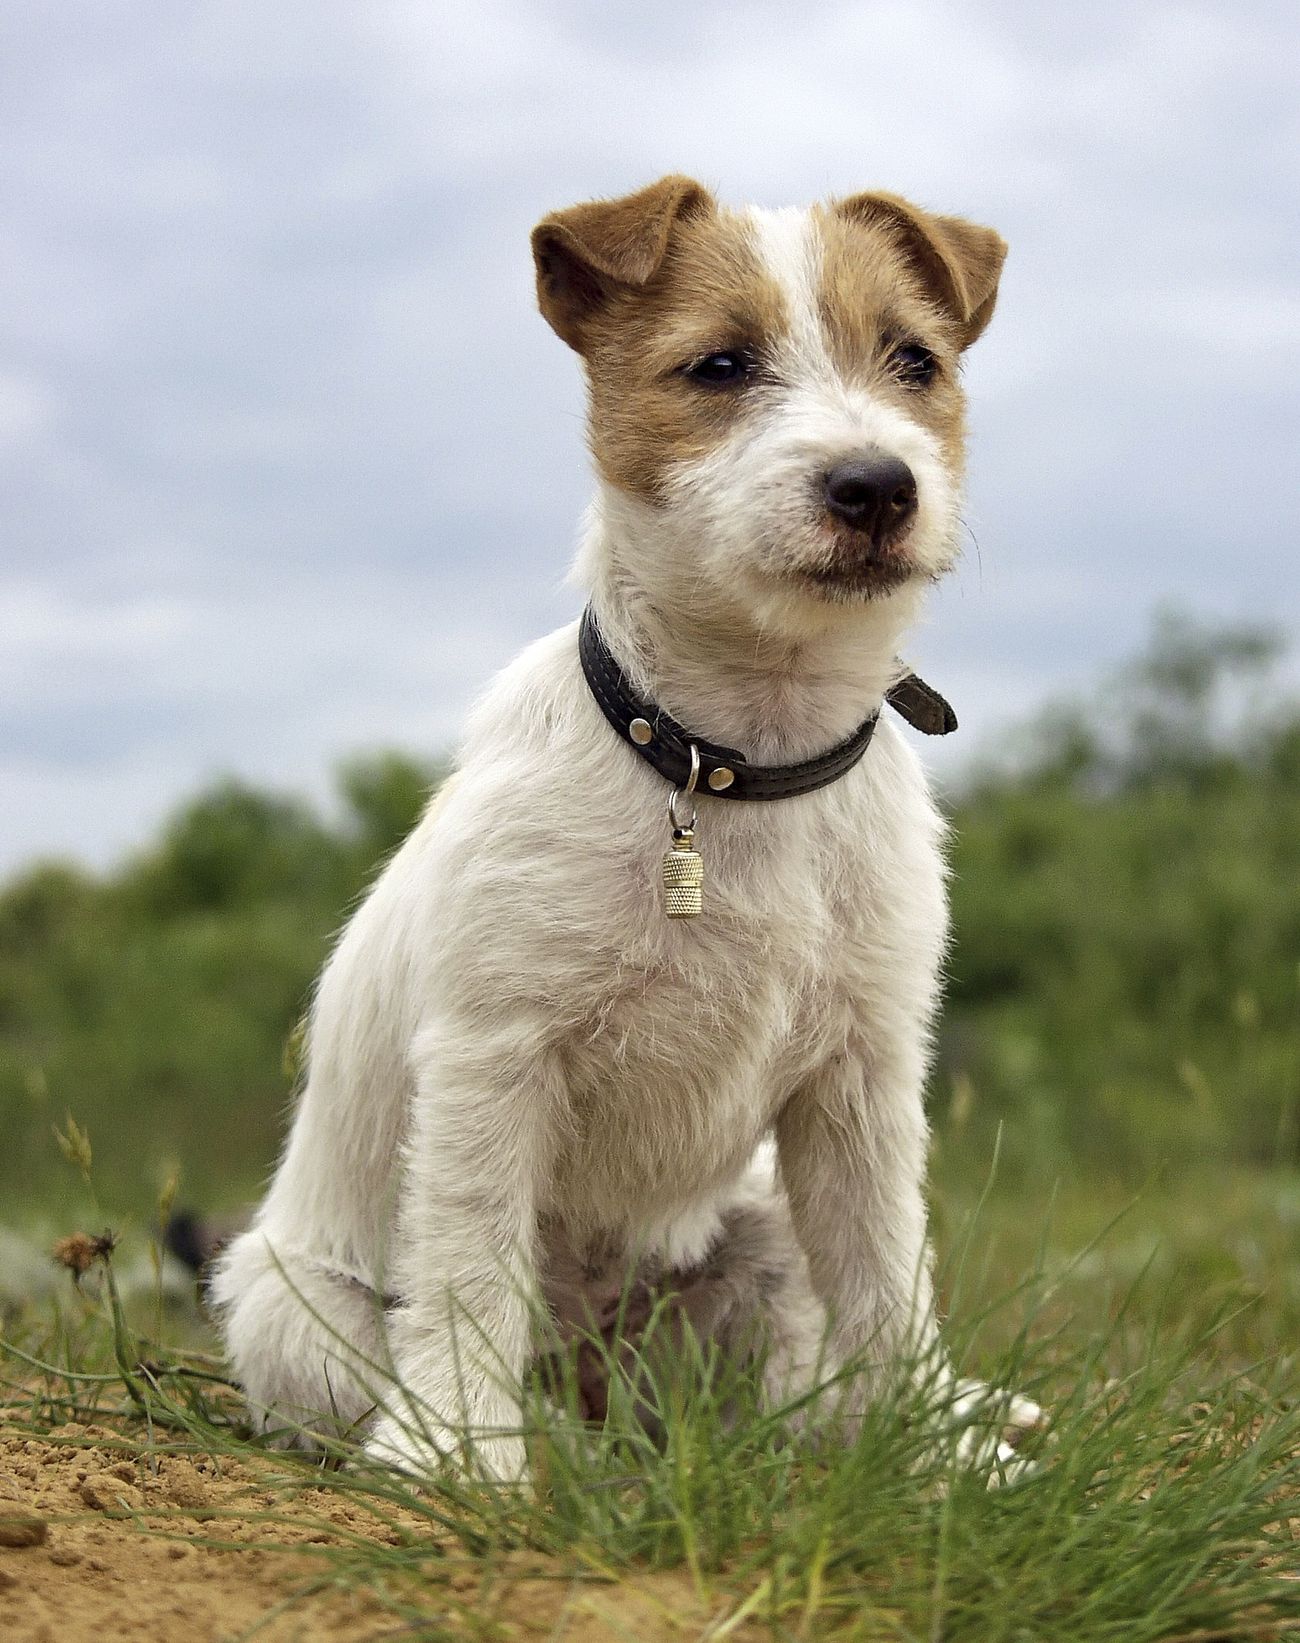 Puppy of Jack Russell Terrier